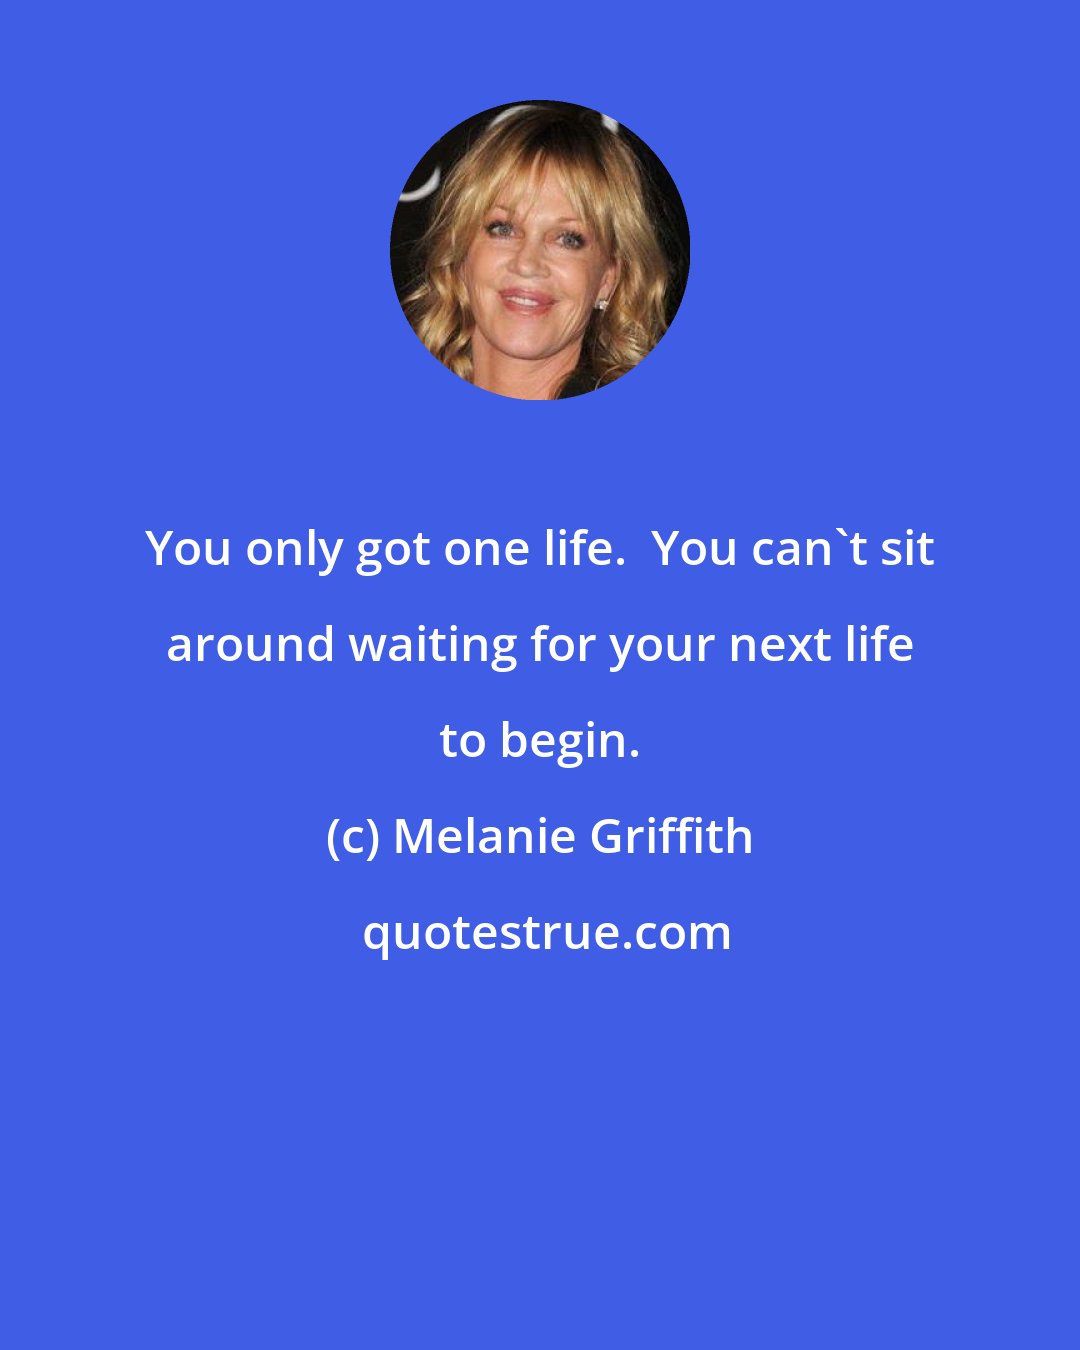 Melanie Griffith: You only got one life.  You can't sit around waiting for your next life to begin.